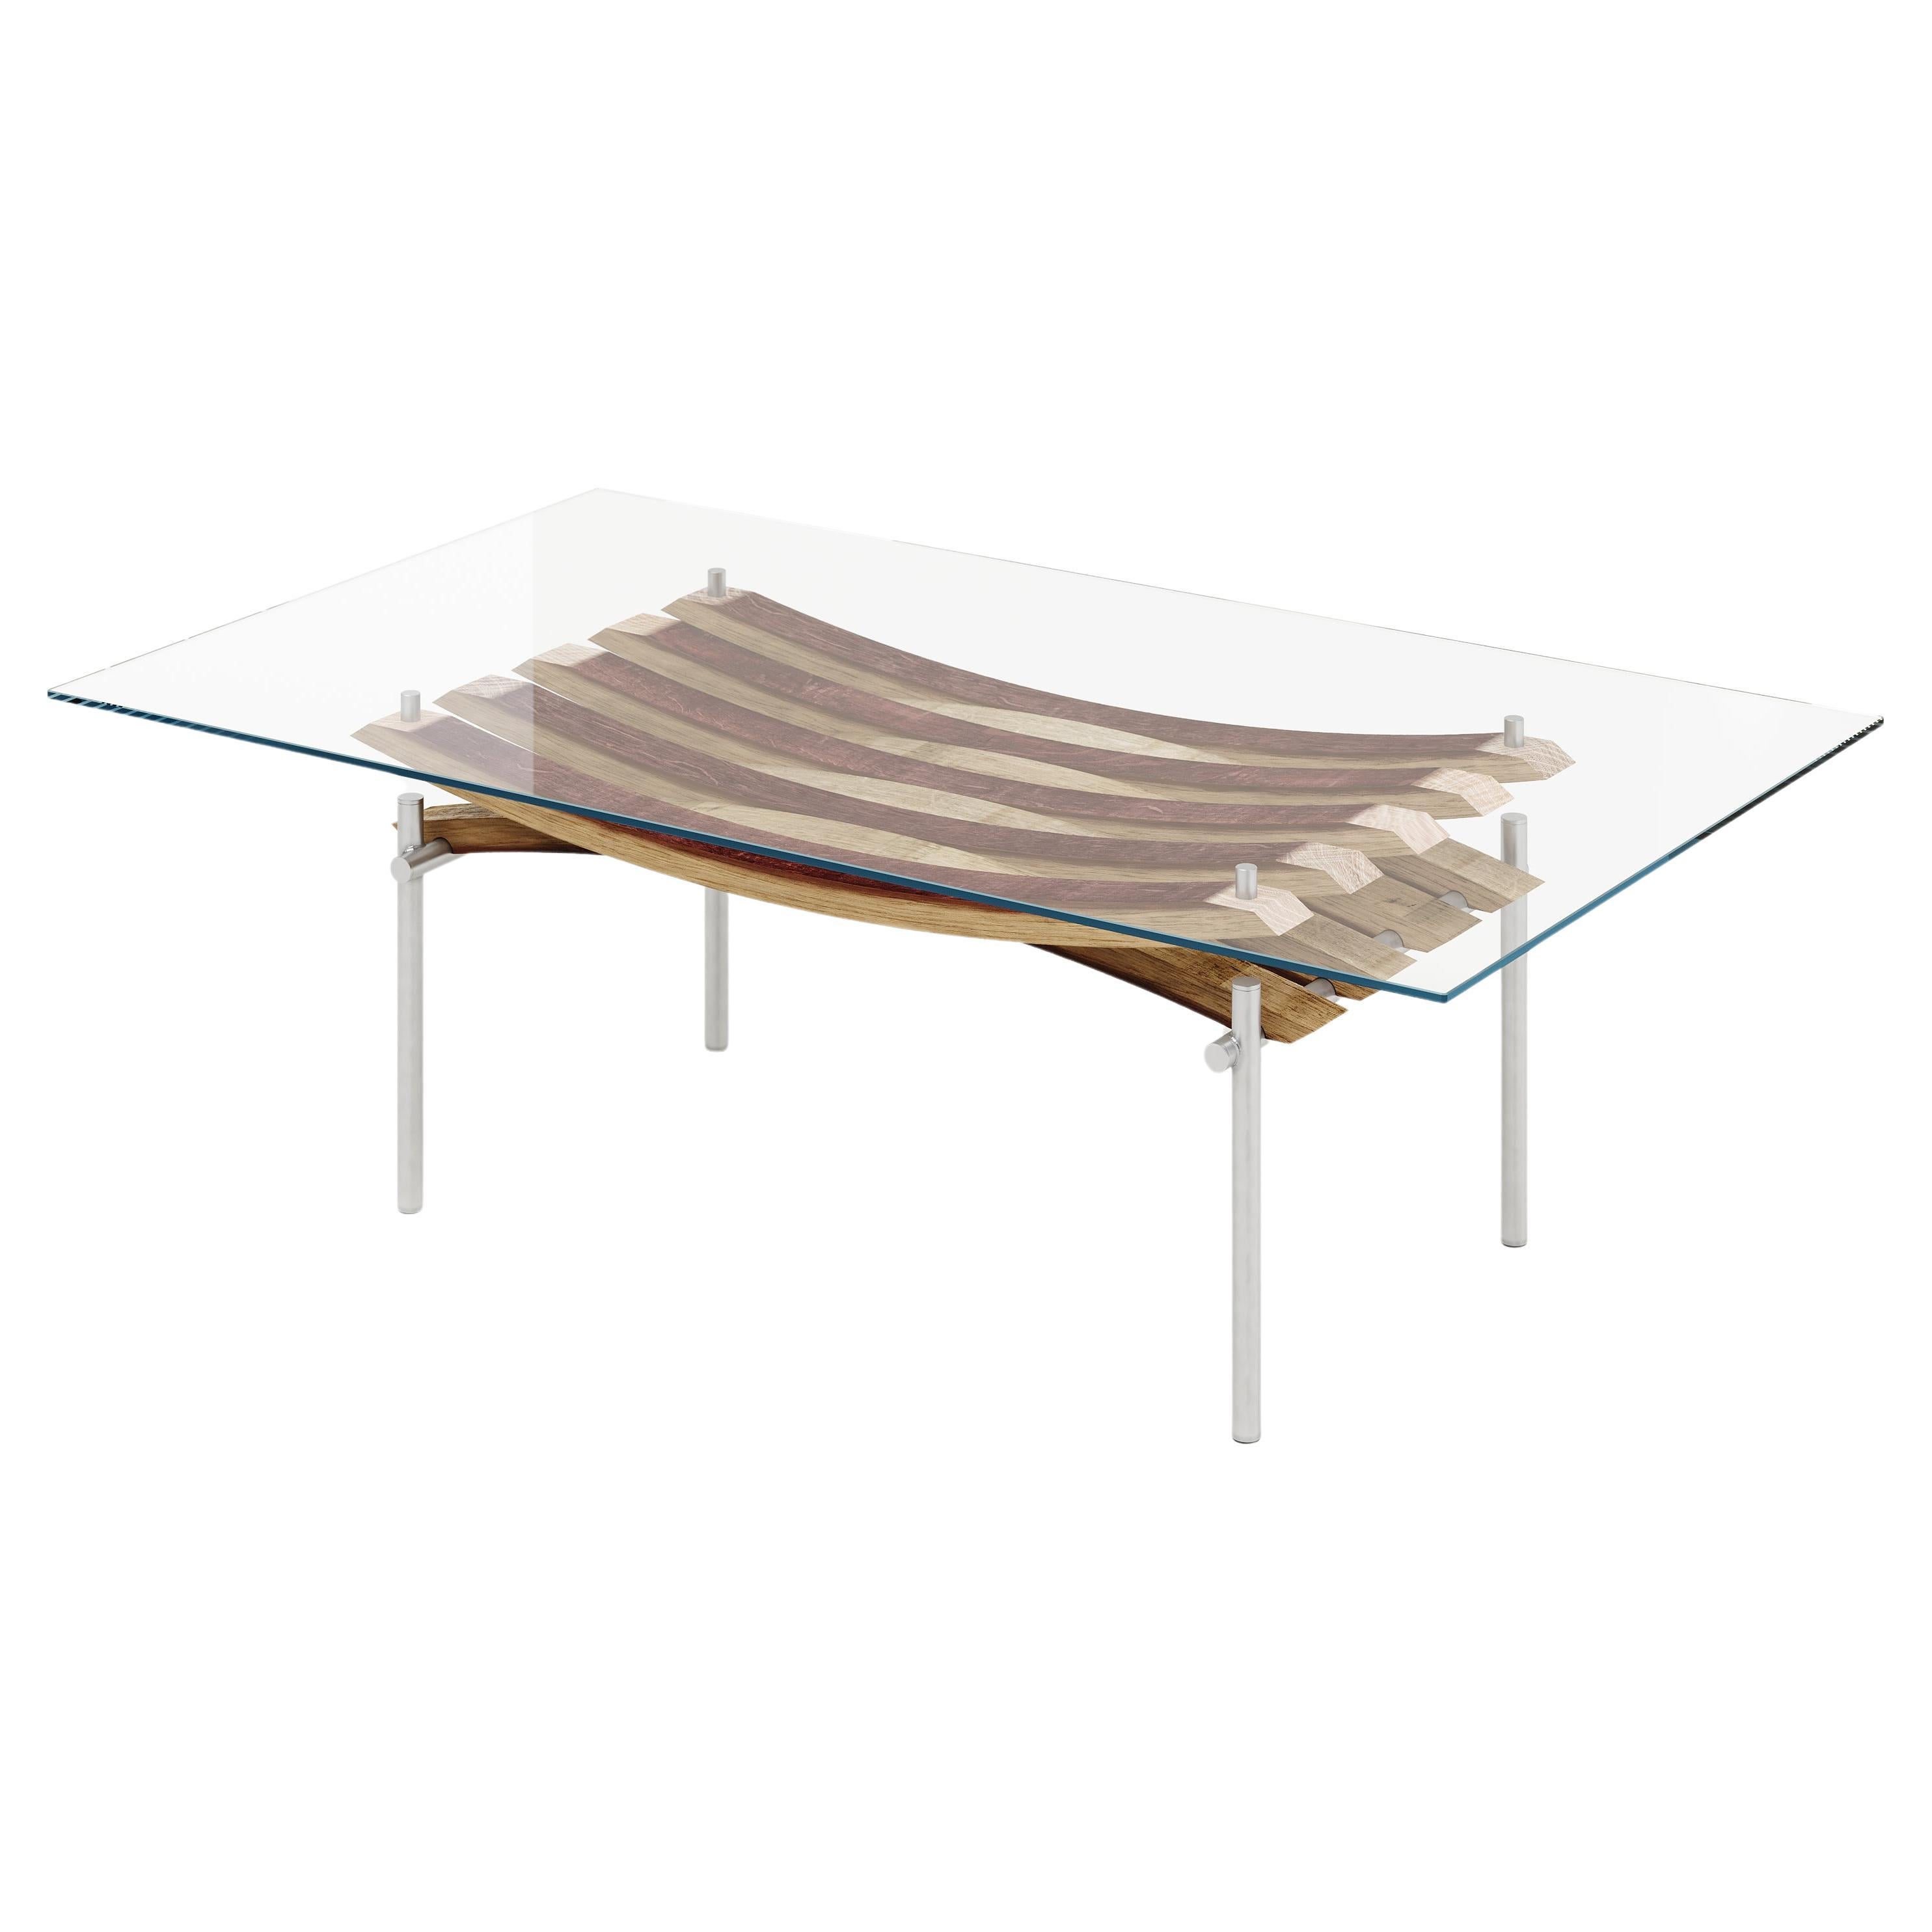 Vinci coffee table by Winetage handmade in Italy For Sale